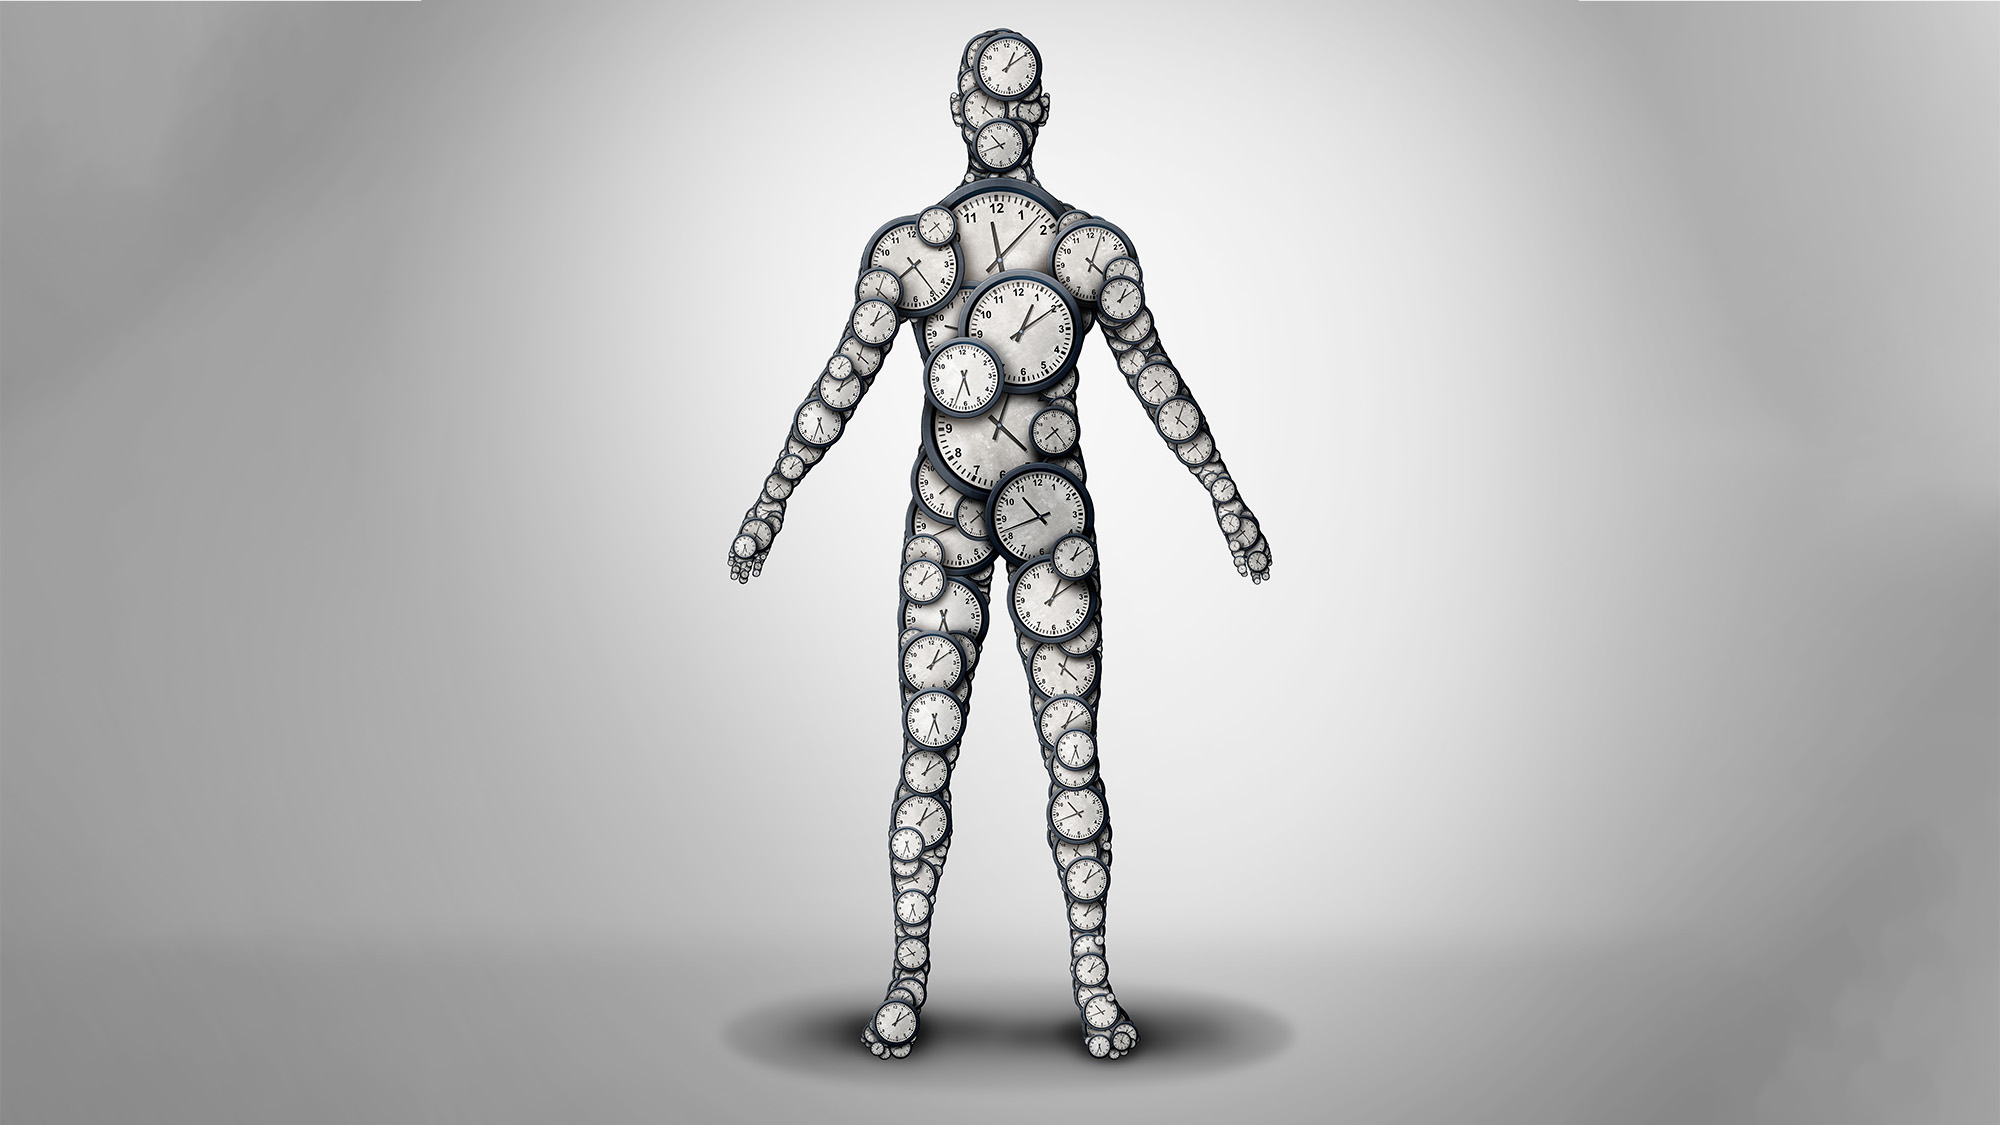 An illustration depicts a human body covered with clocks to represent aging